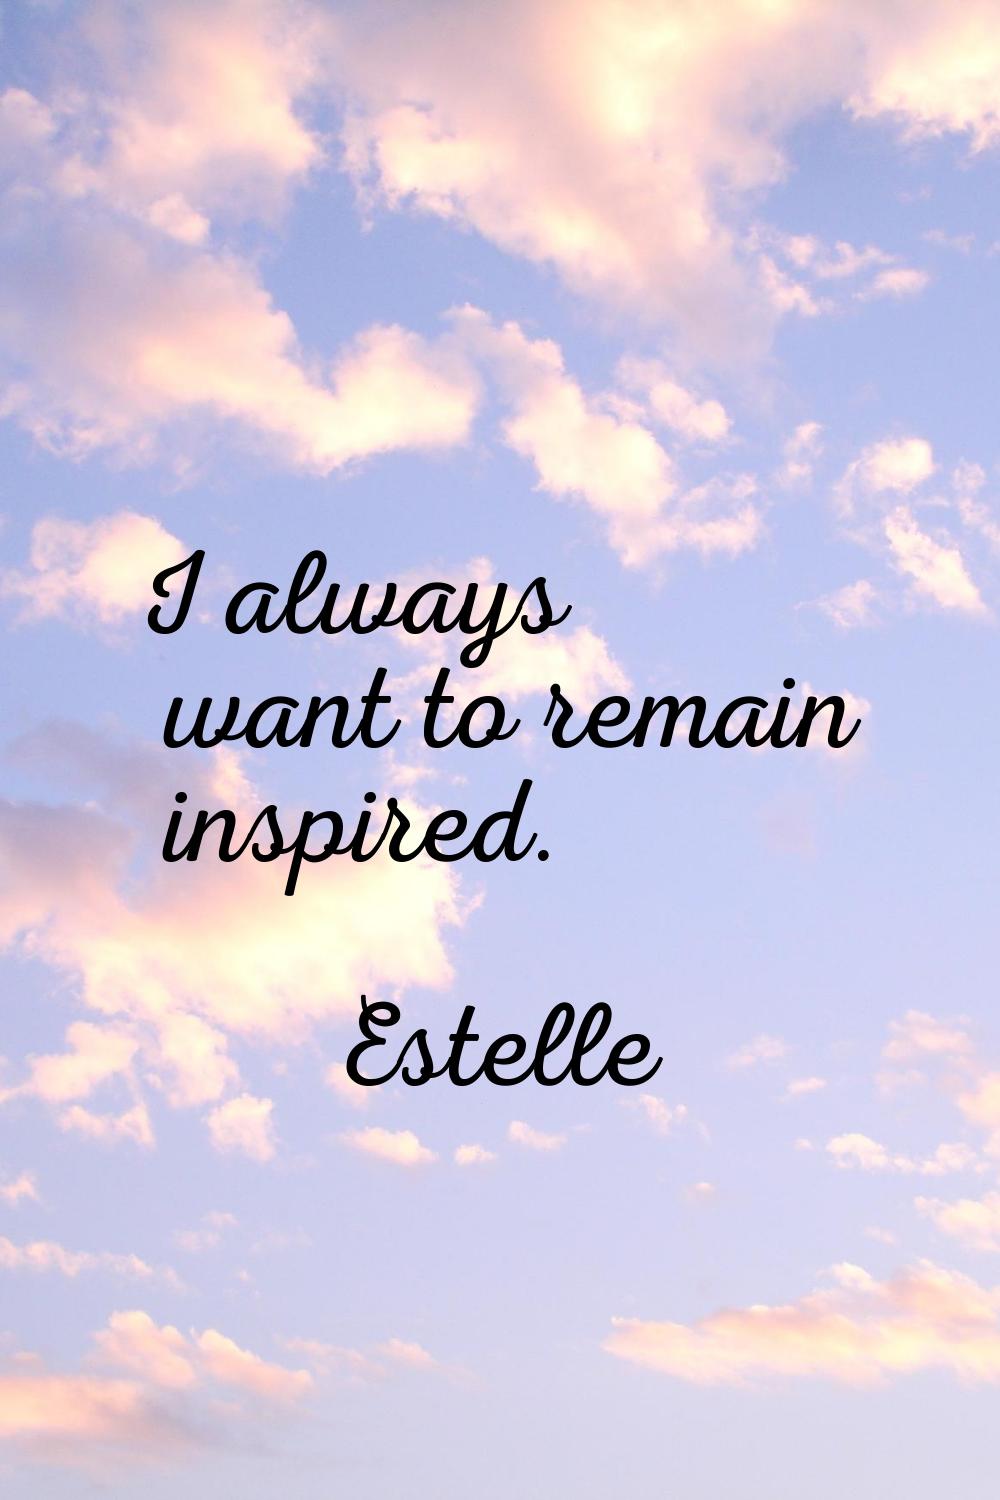 I always want to remain inspired.